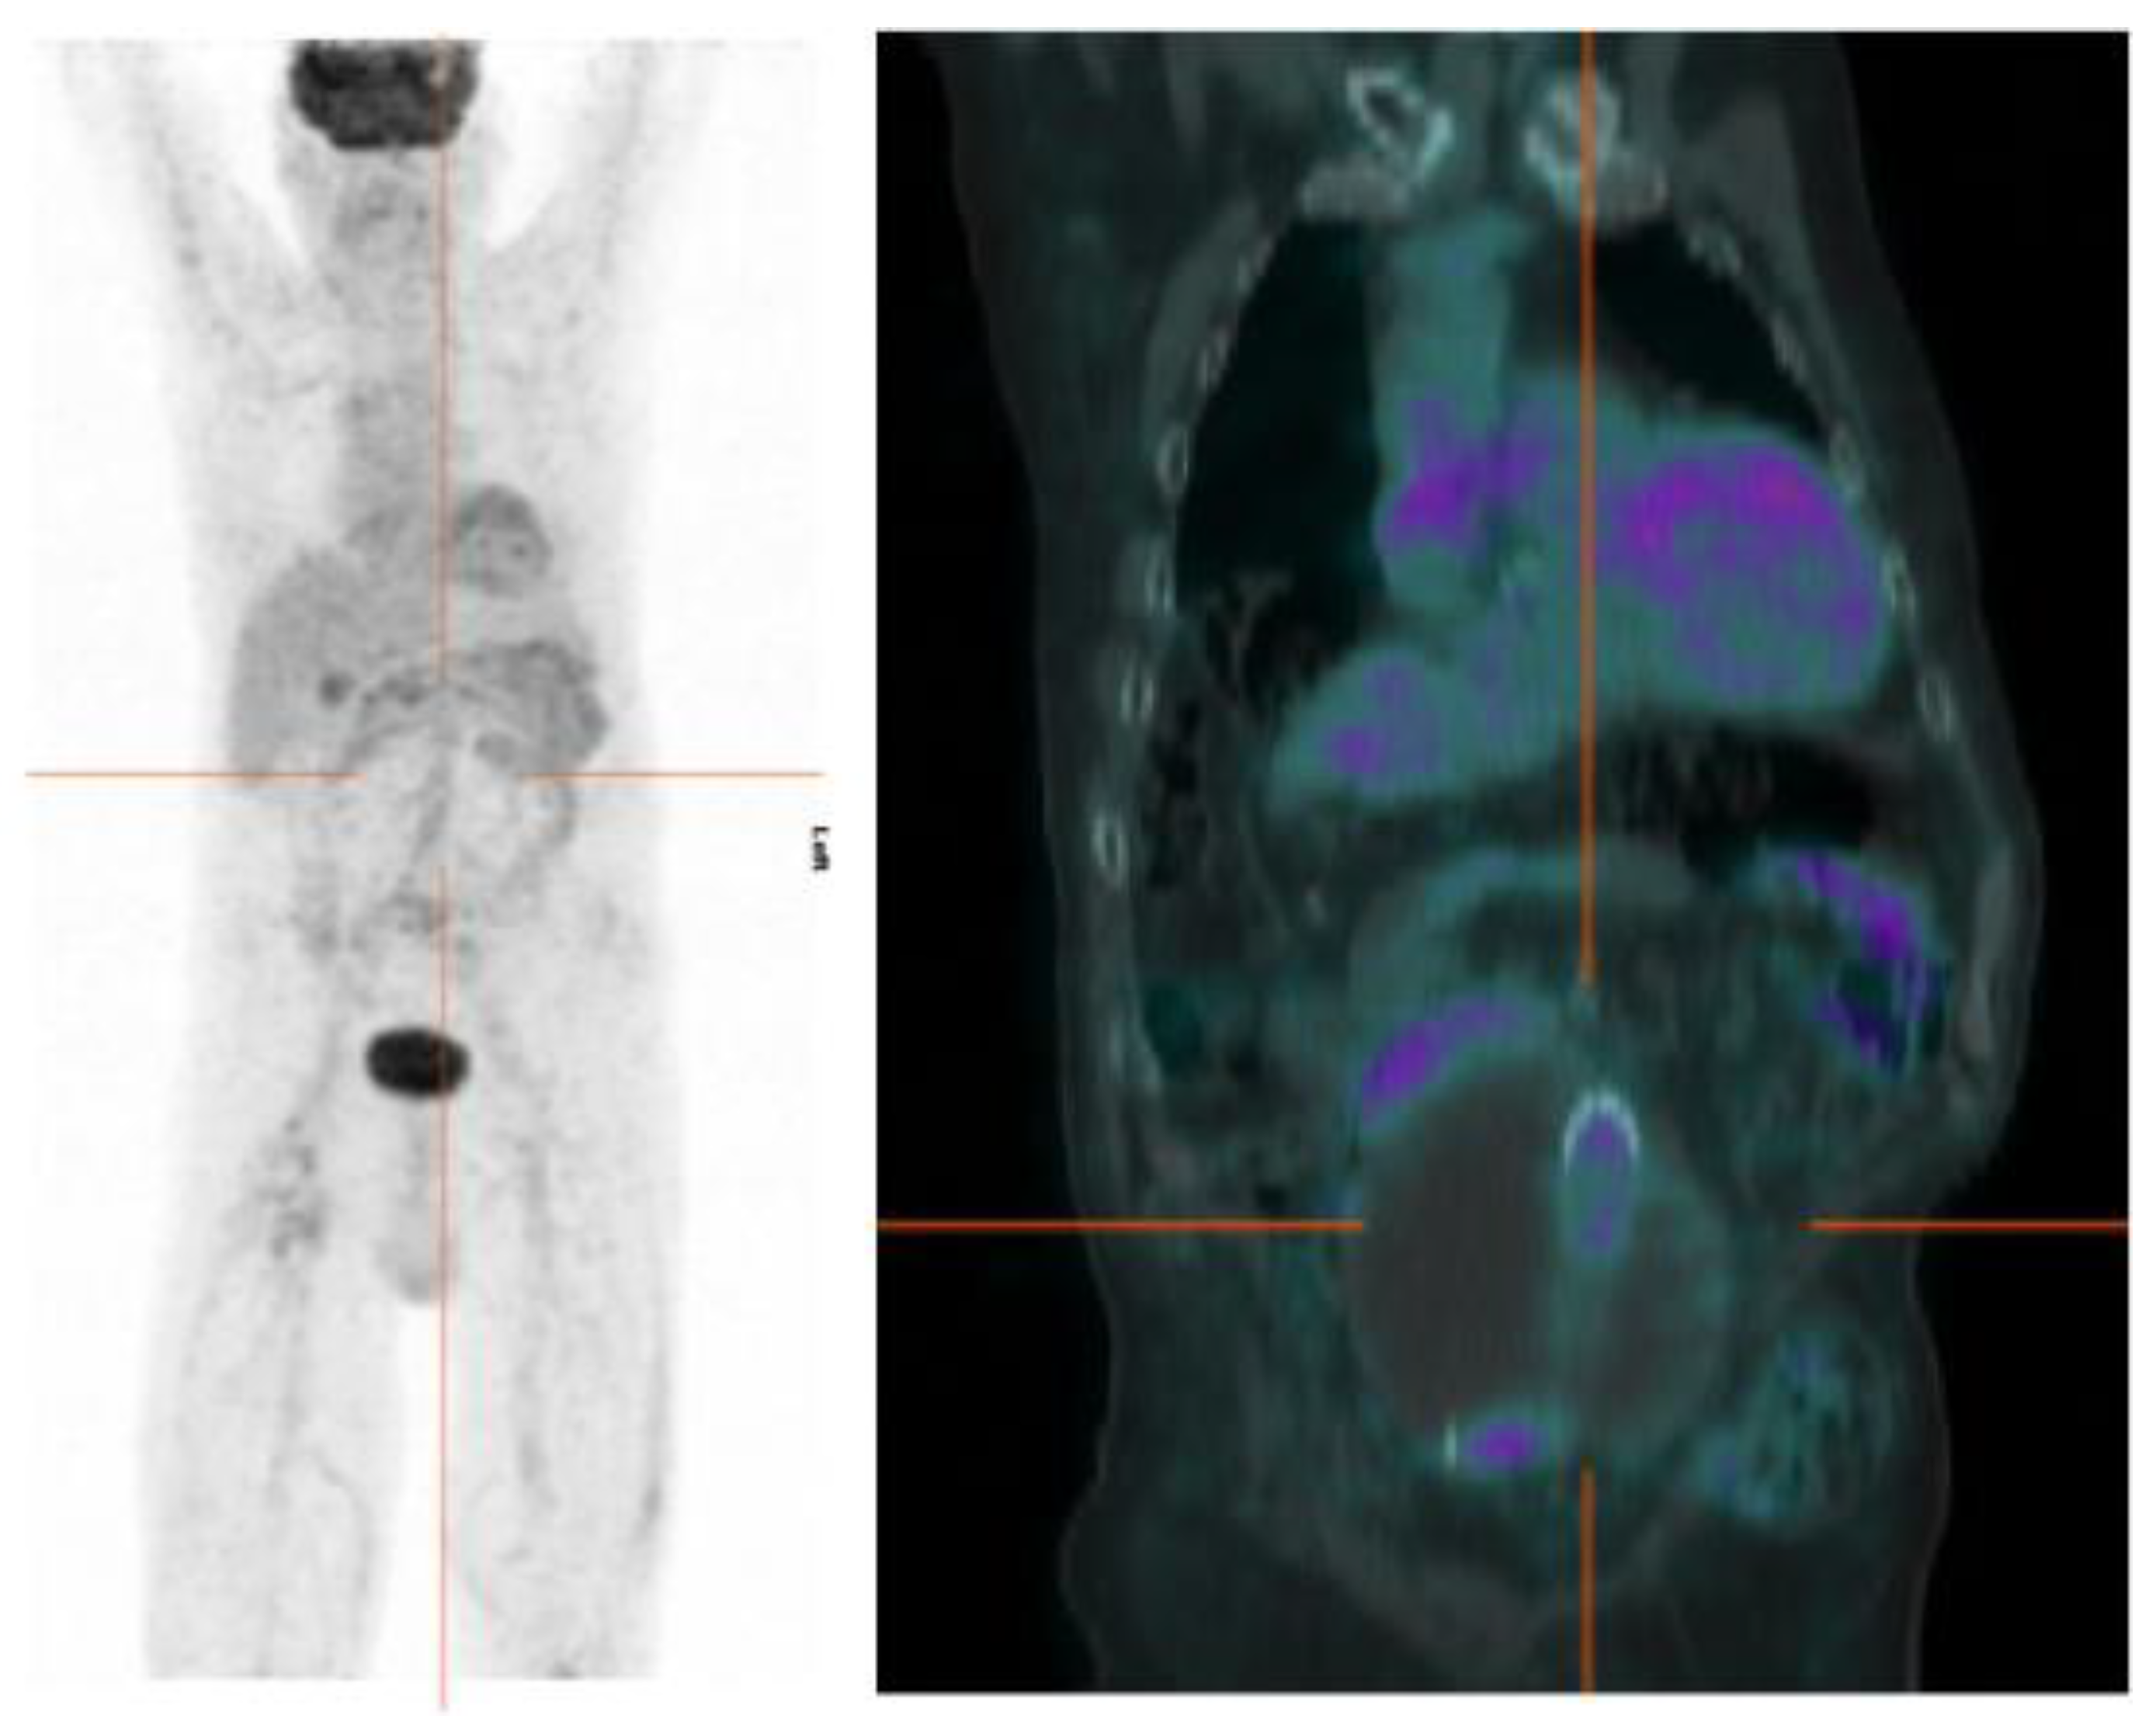 JCM   Free Full Text   Imaging Modalities for the Diagnosis of ...